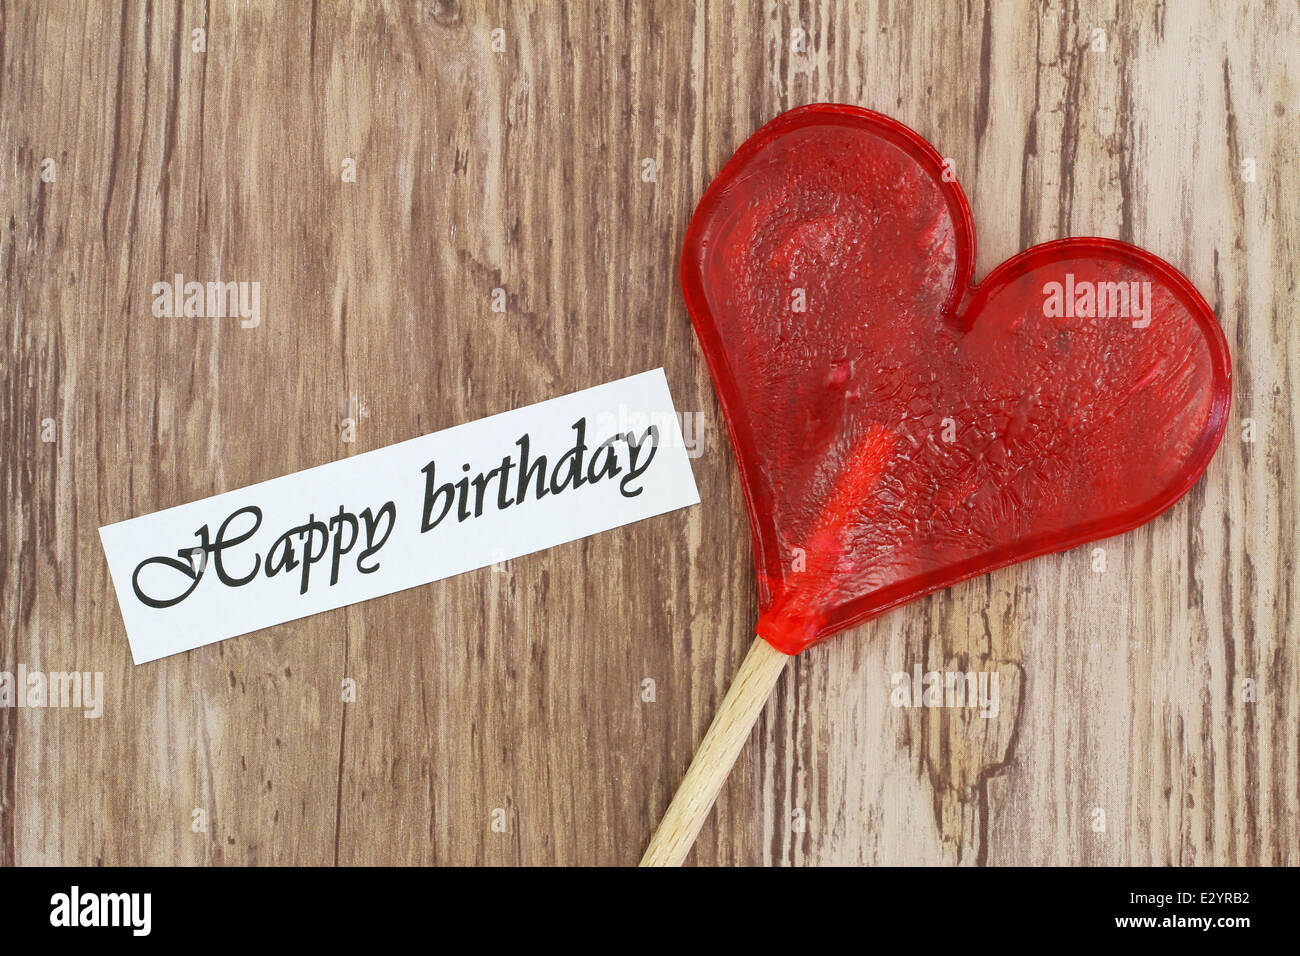 Happy Birthday card with heart shaped lollipop Stock Photo